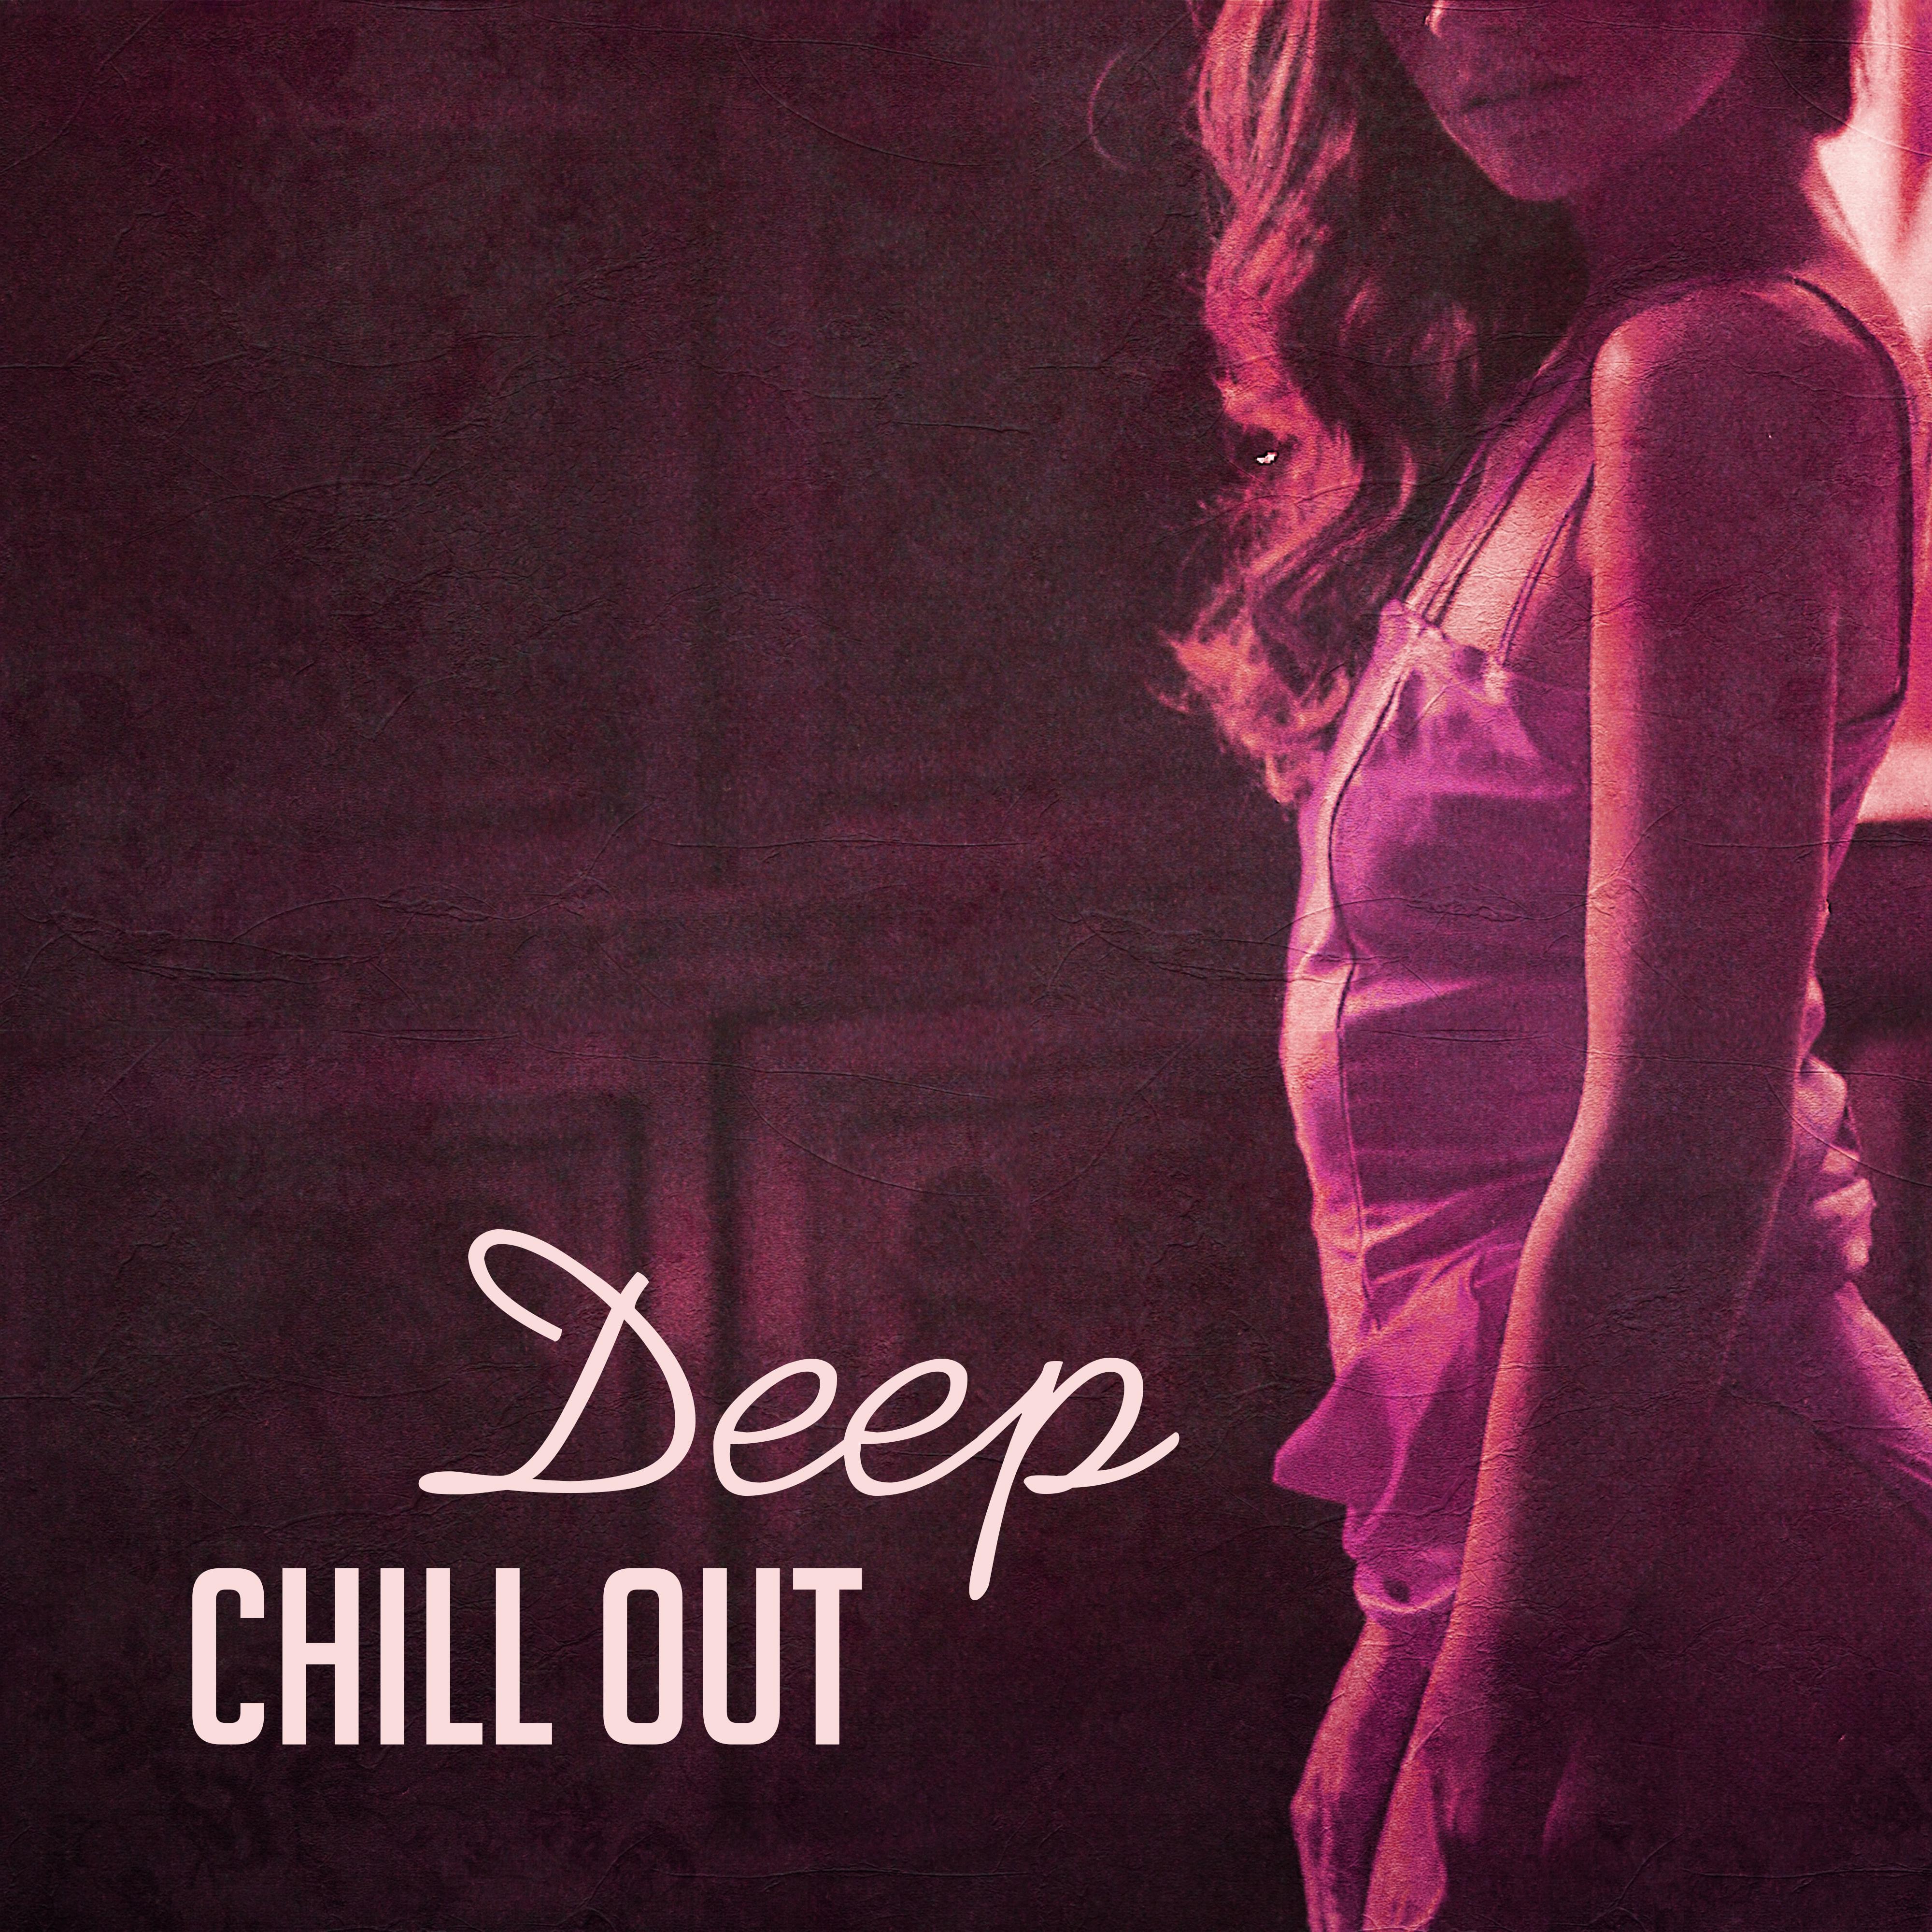 Deep Chill Out  Ibiza Lounge, Positive Vibrations, Beach Chill, Summertime, Pure Relaxation, Electronic Music,  Chill